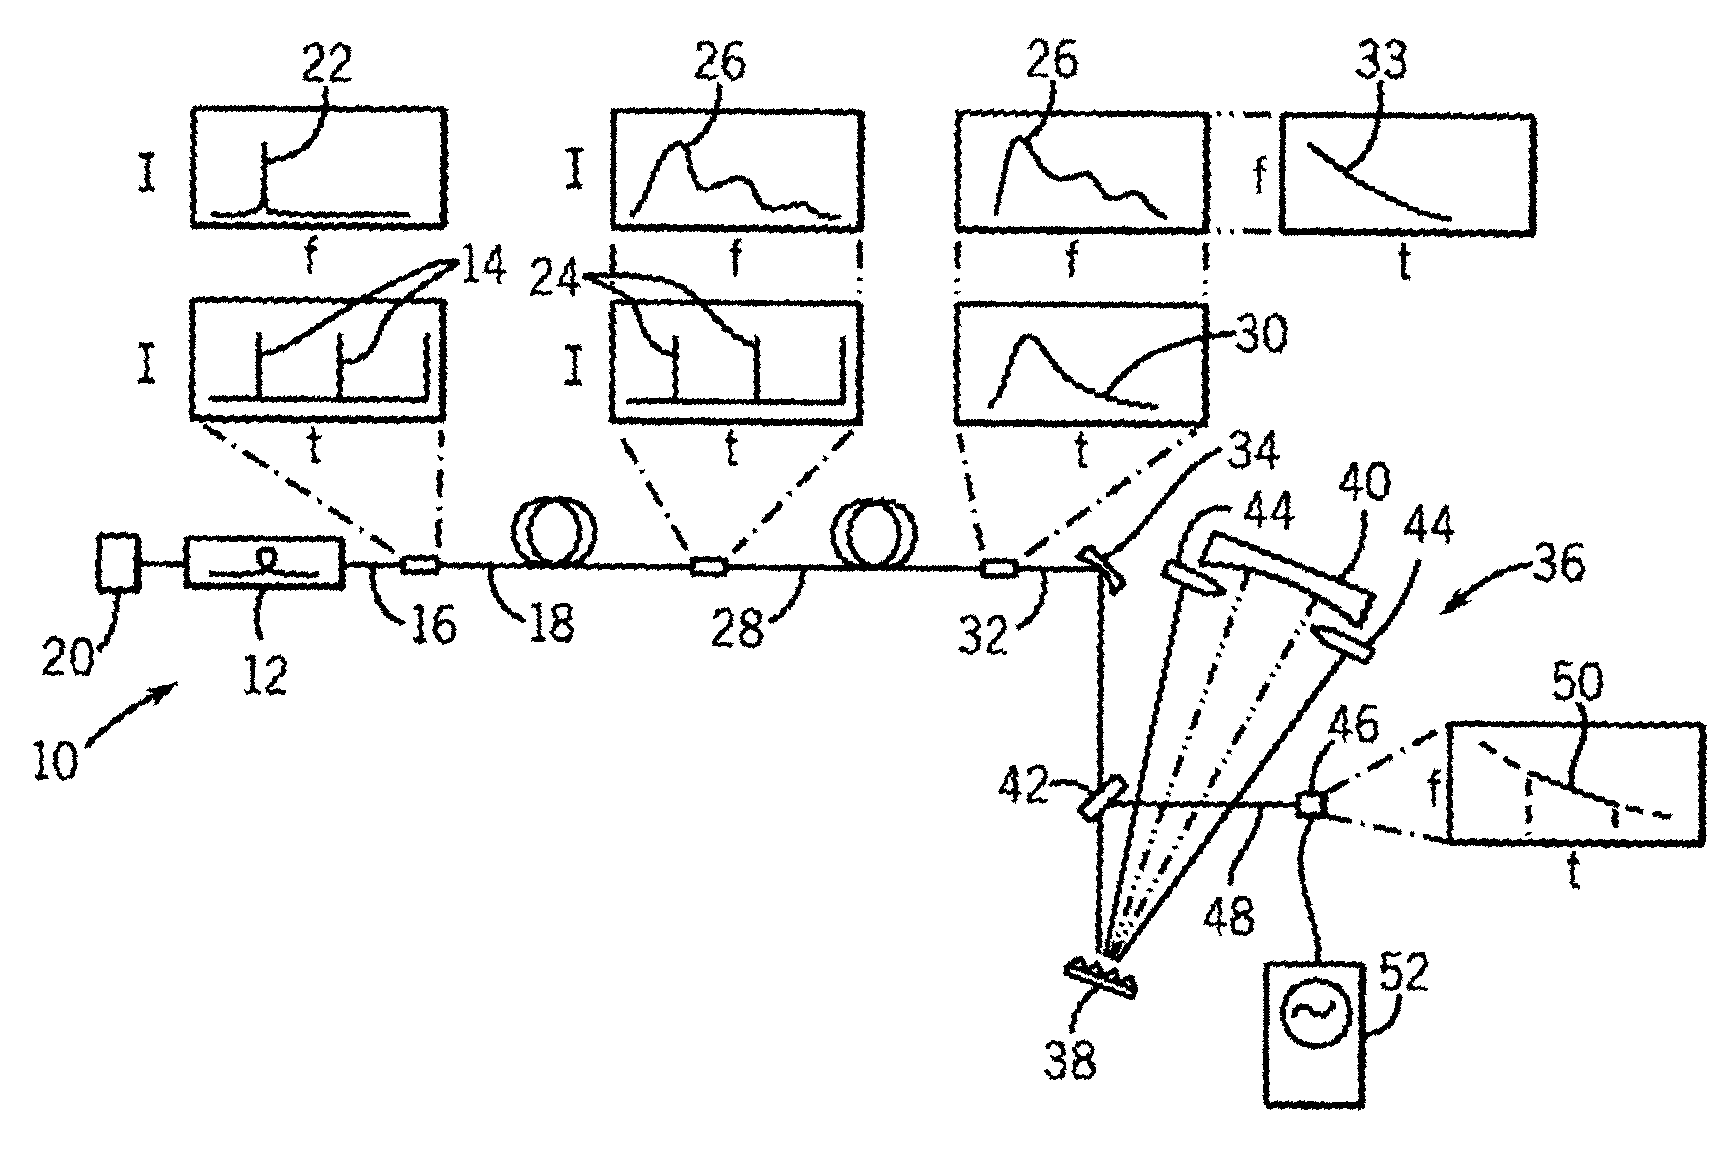 High speed swept frequency spectroscopic system